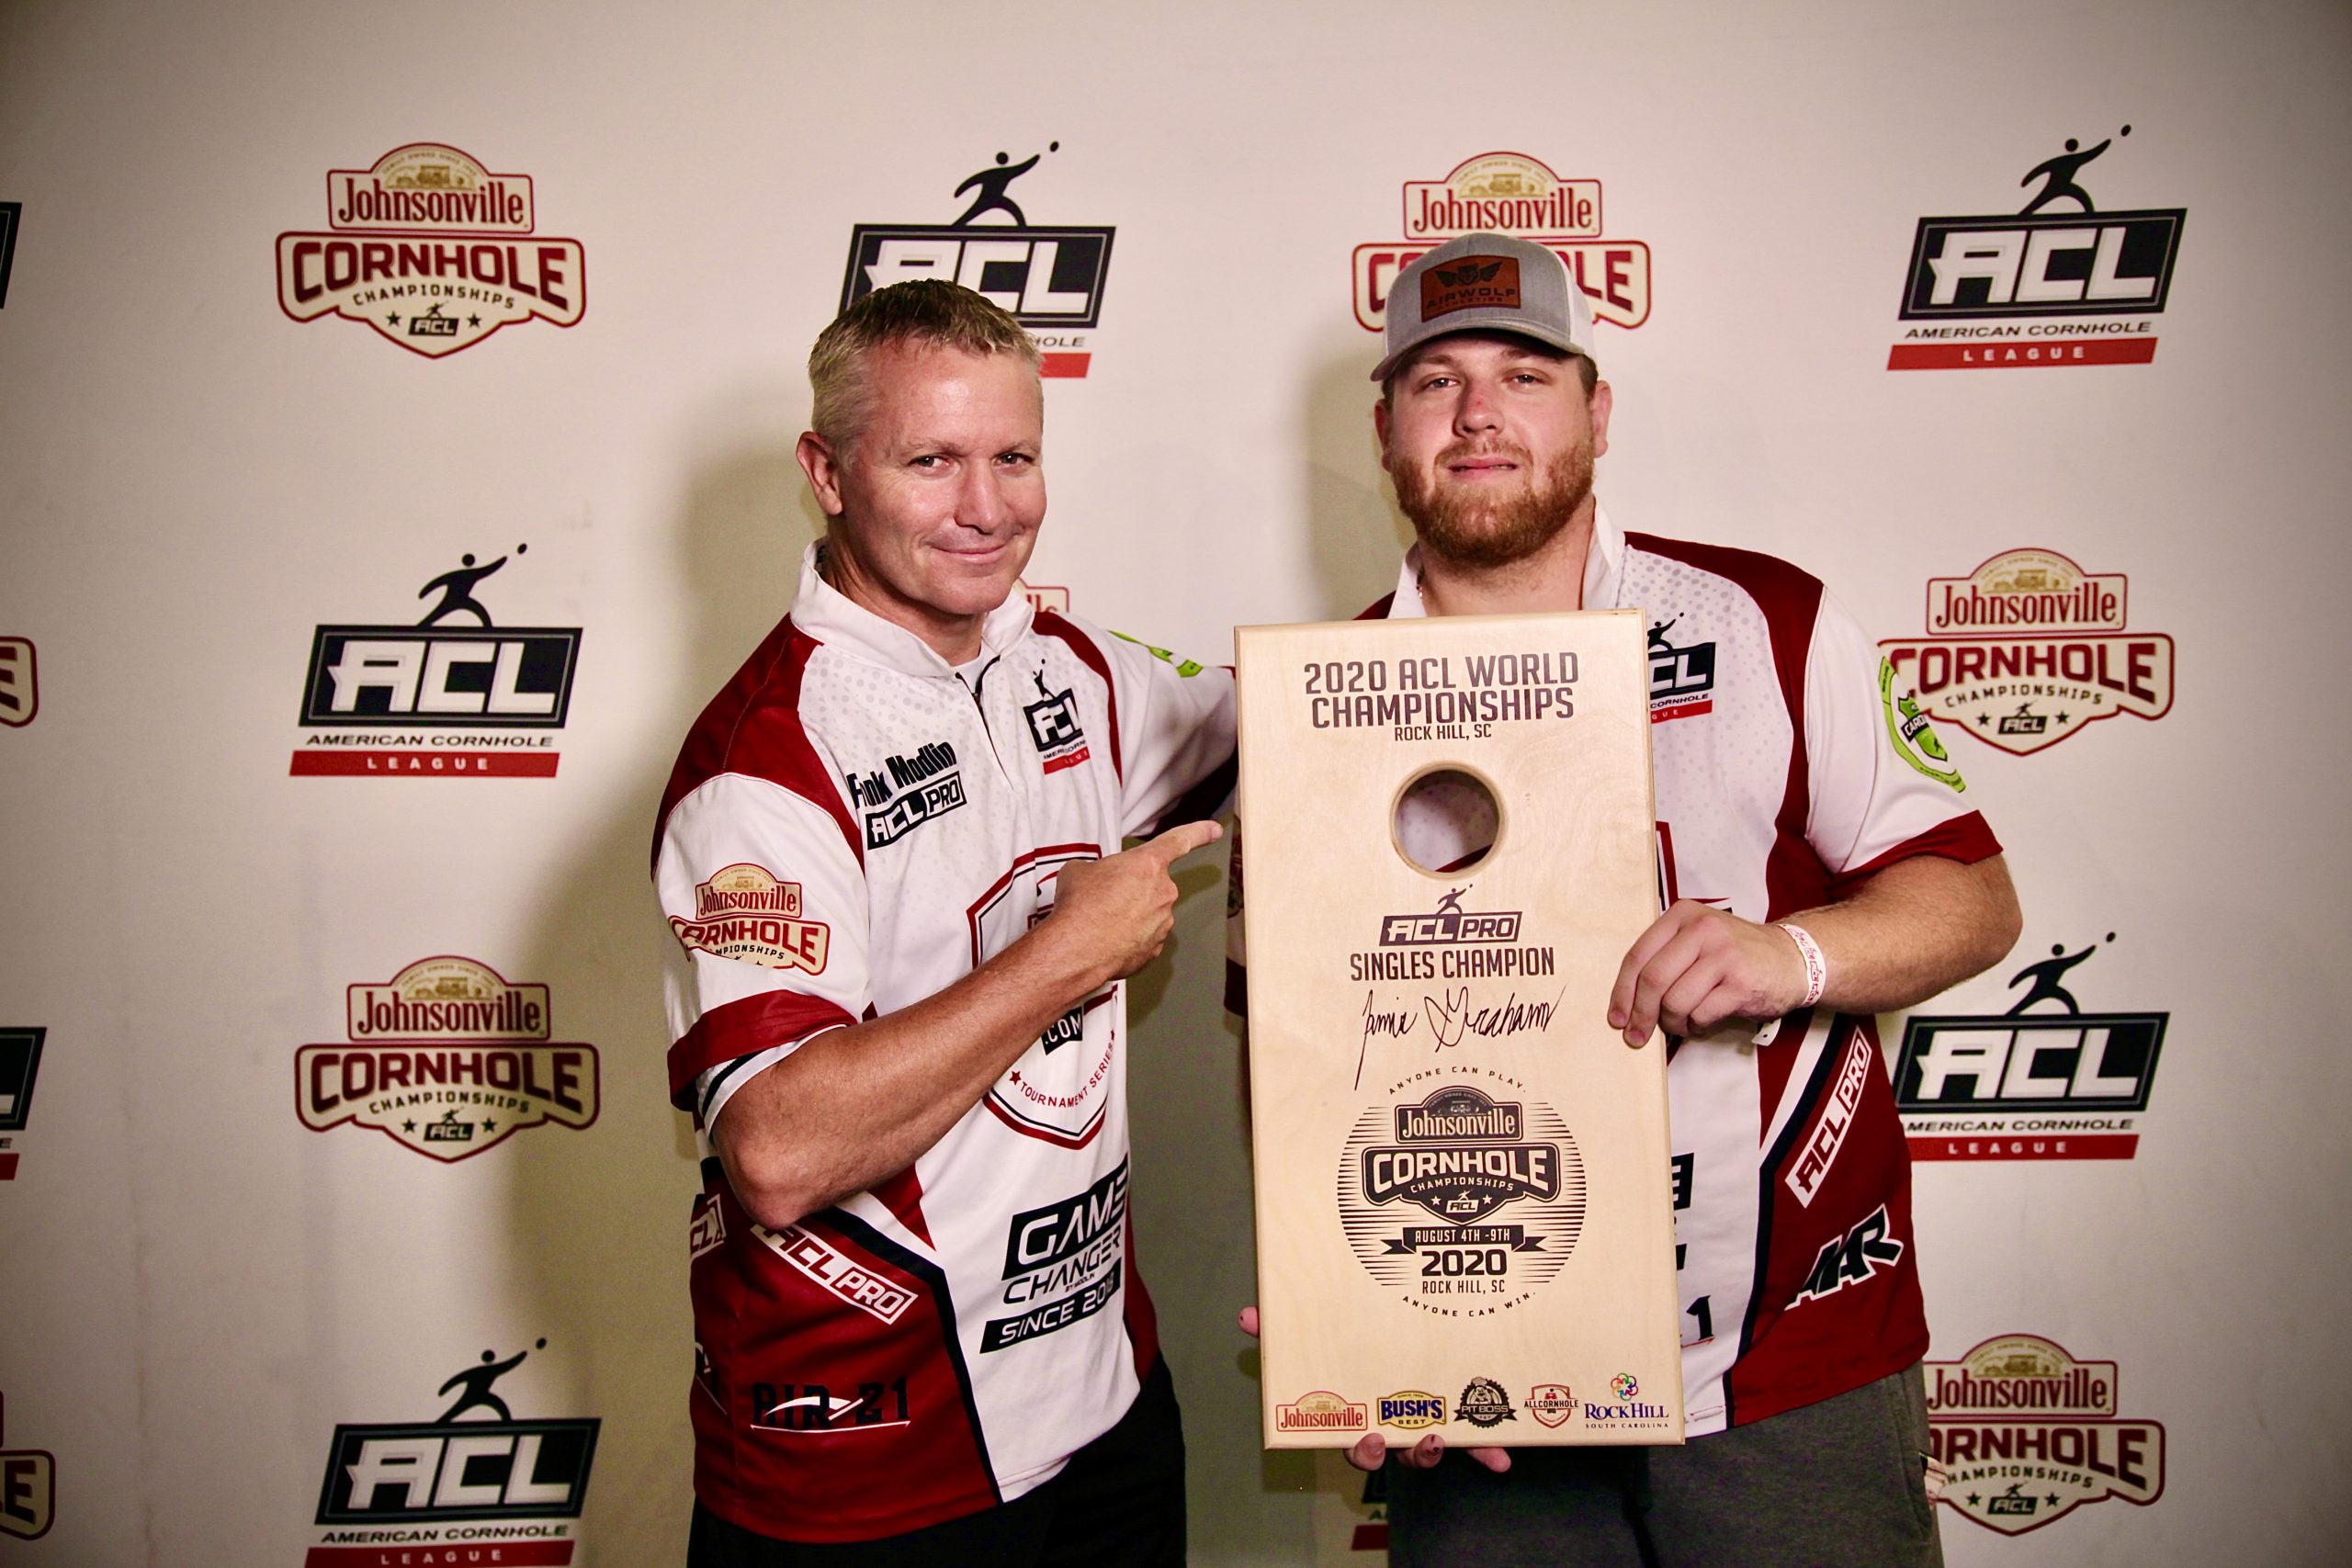 ACL’s World Champion On How Covid Catapulted Cornhole